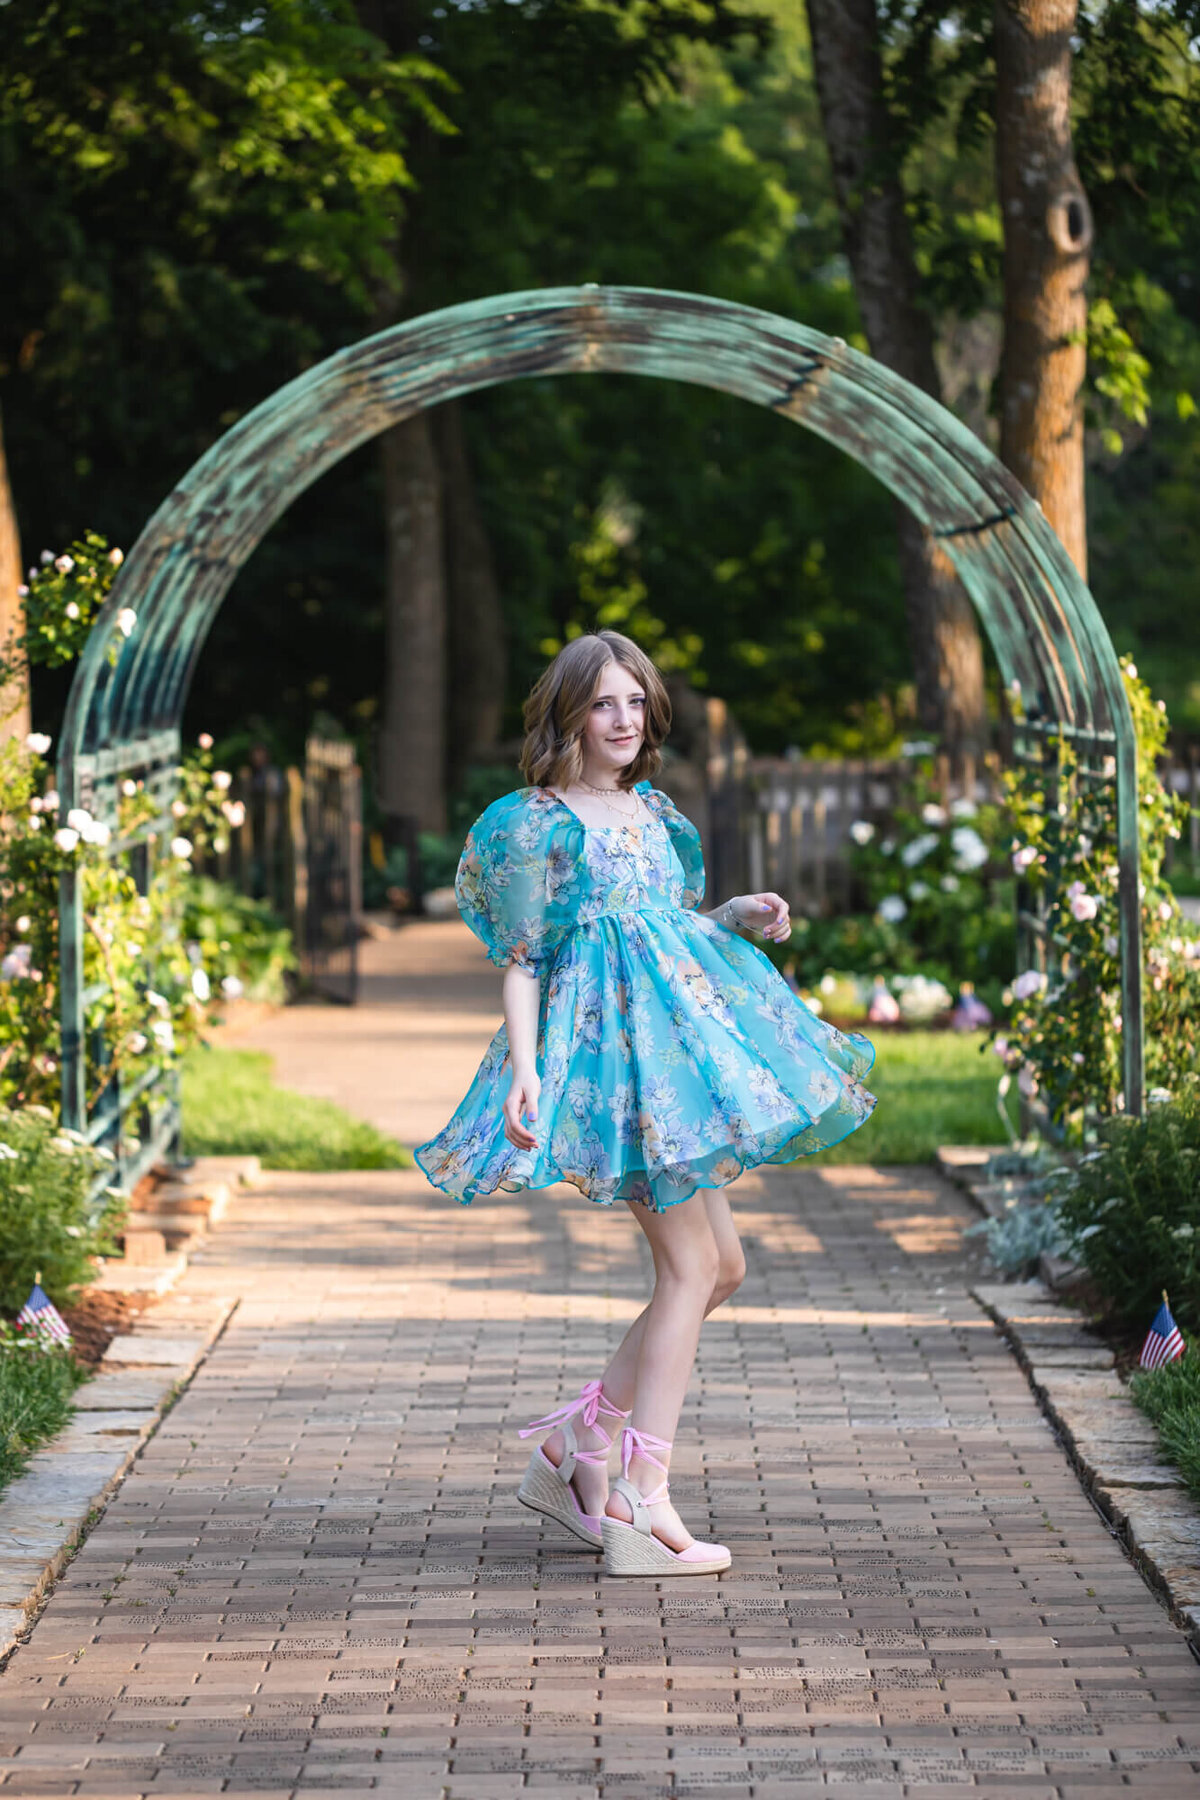 Pretty teenage girl in a blue floral dress and pink shoes twirling in front of a rose trellis. Captured by Springfield, MO teen photographer Dynae Levingston.